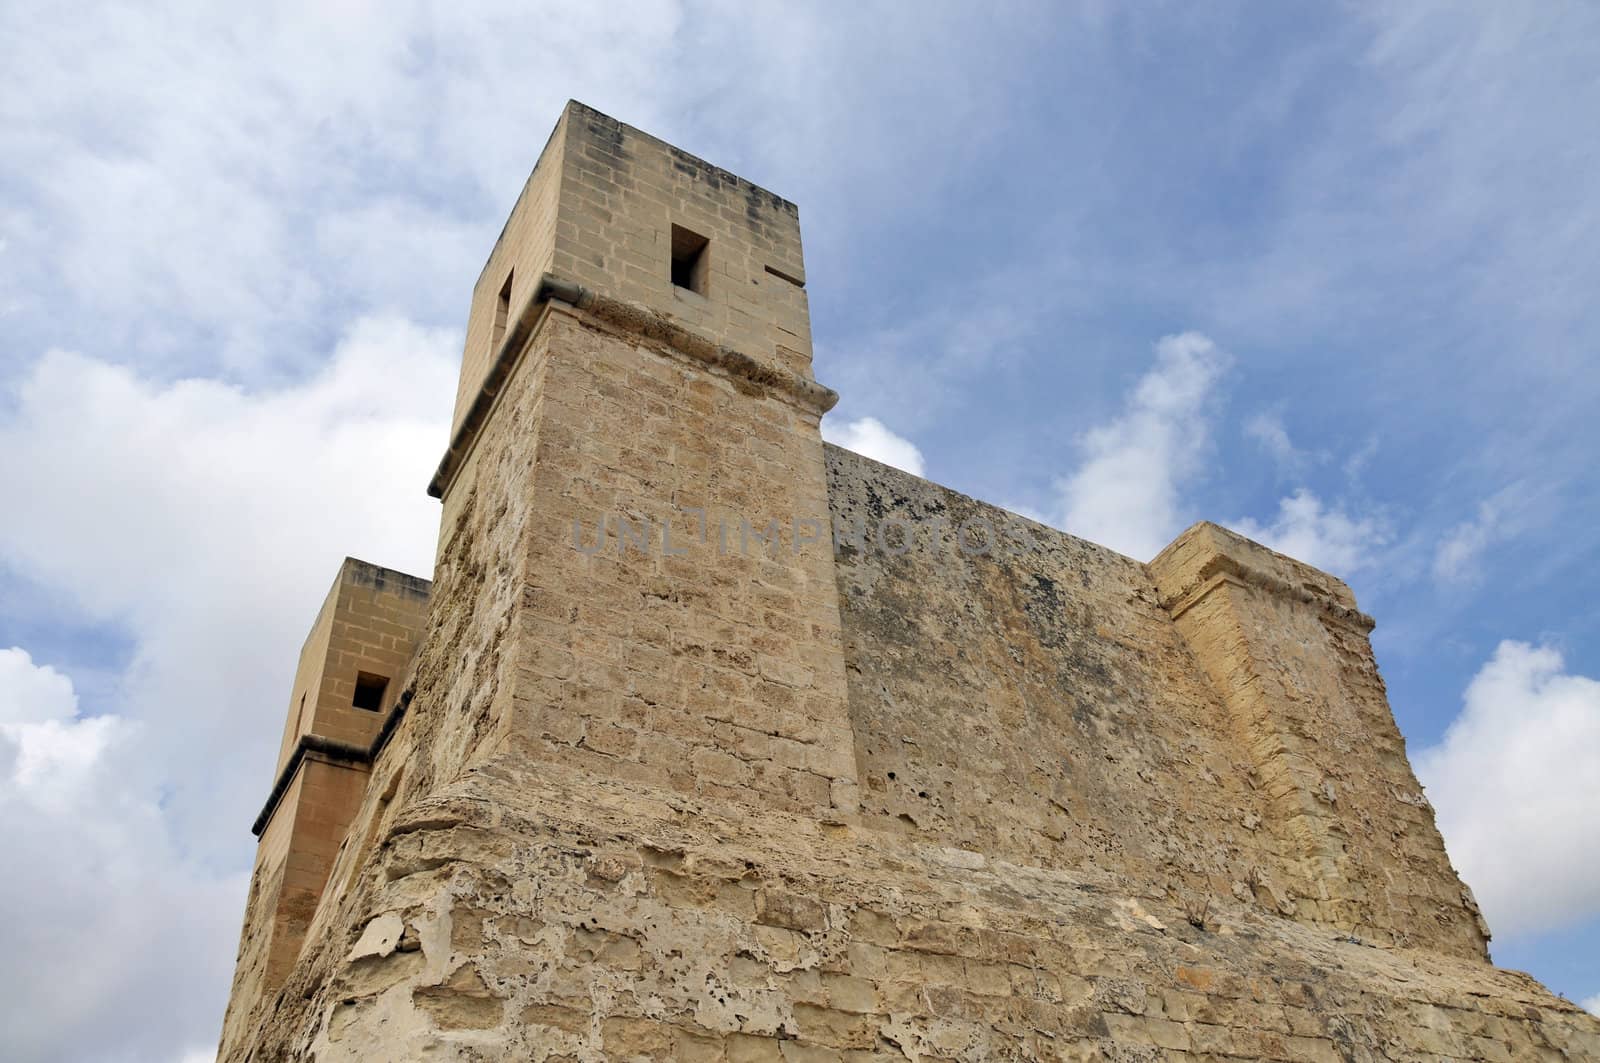 Very old tower on Malta with blue sky and clouds